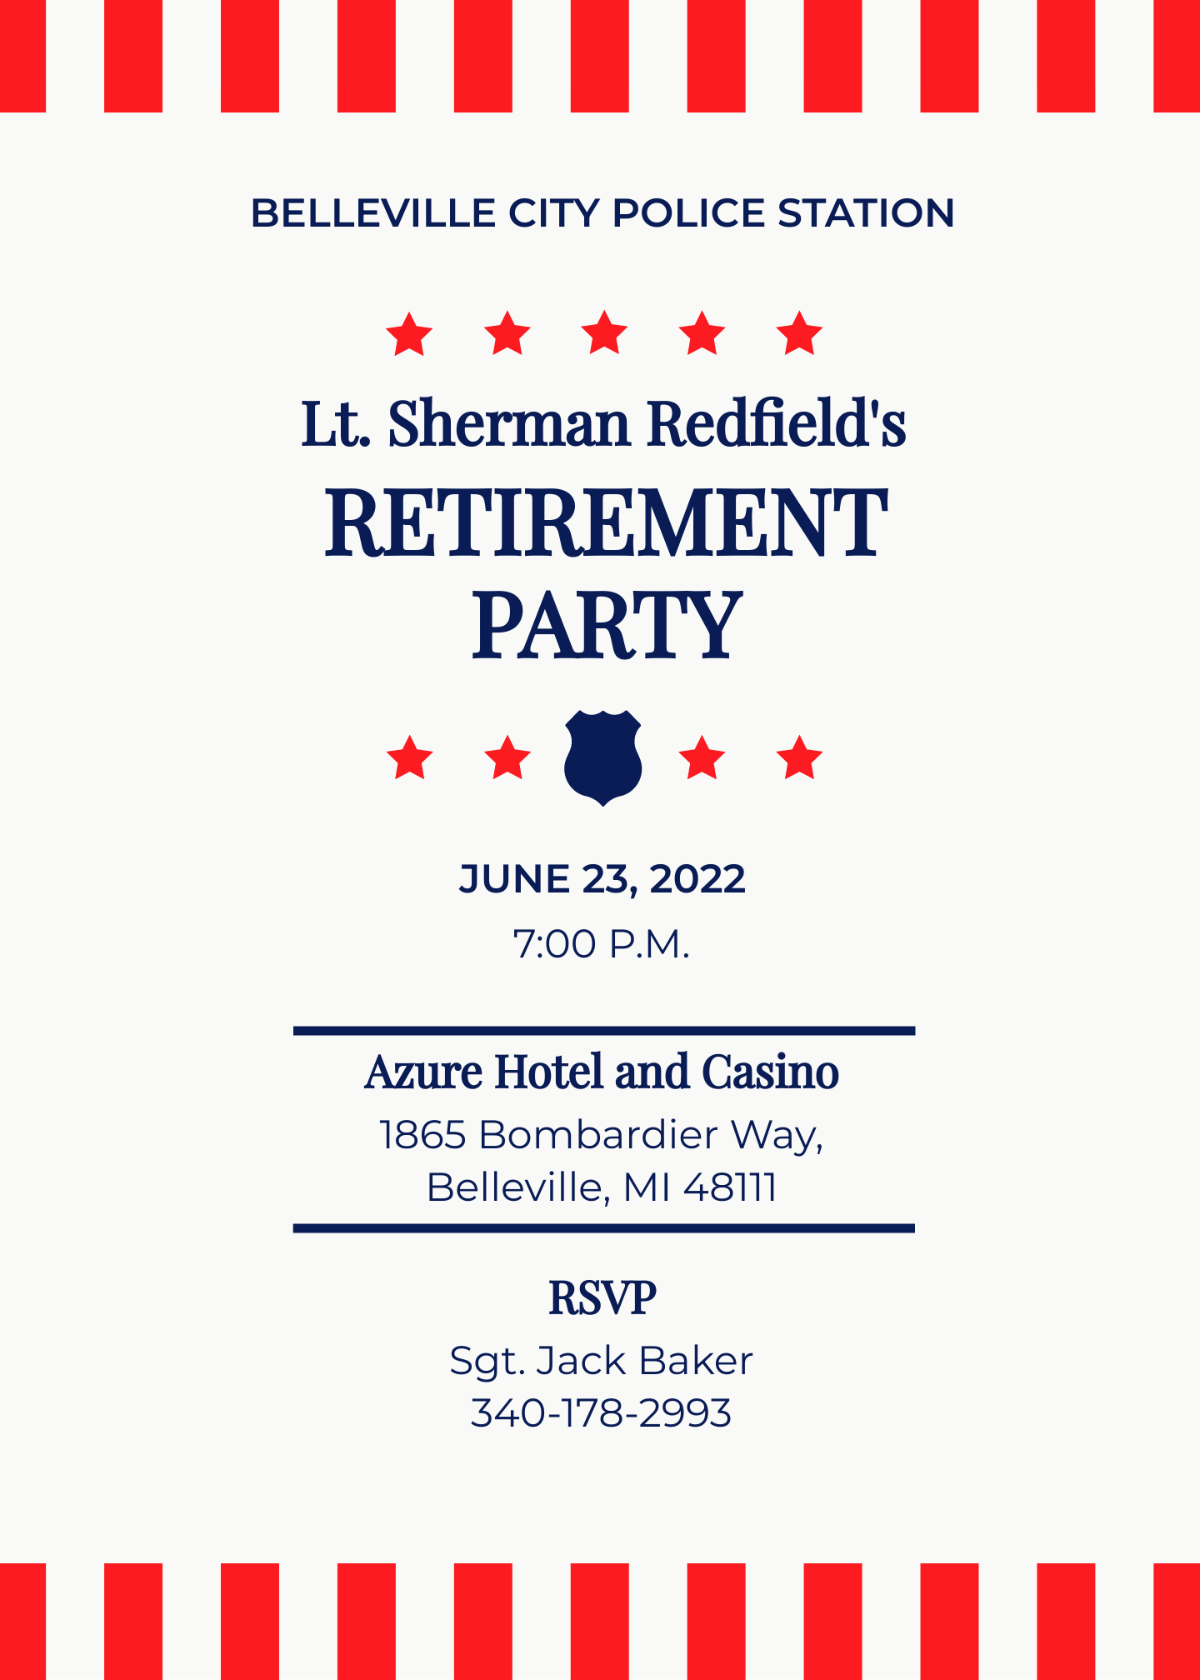 Police Retirement Party Invitation Template